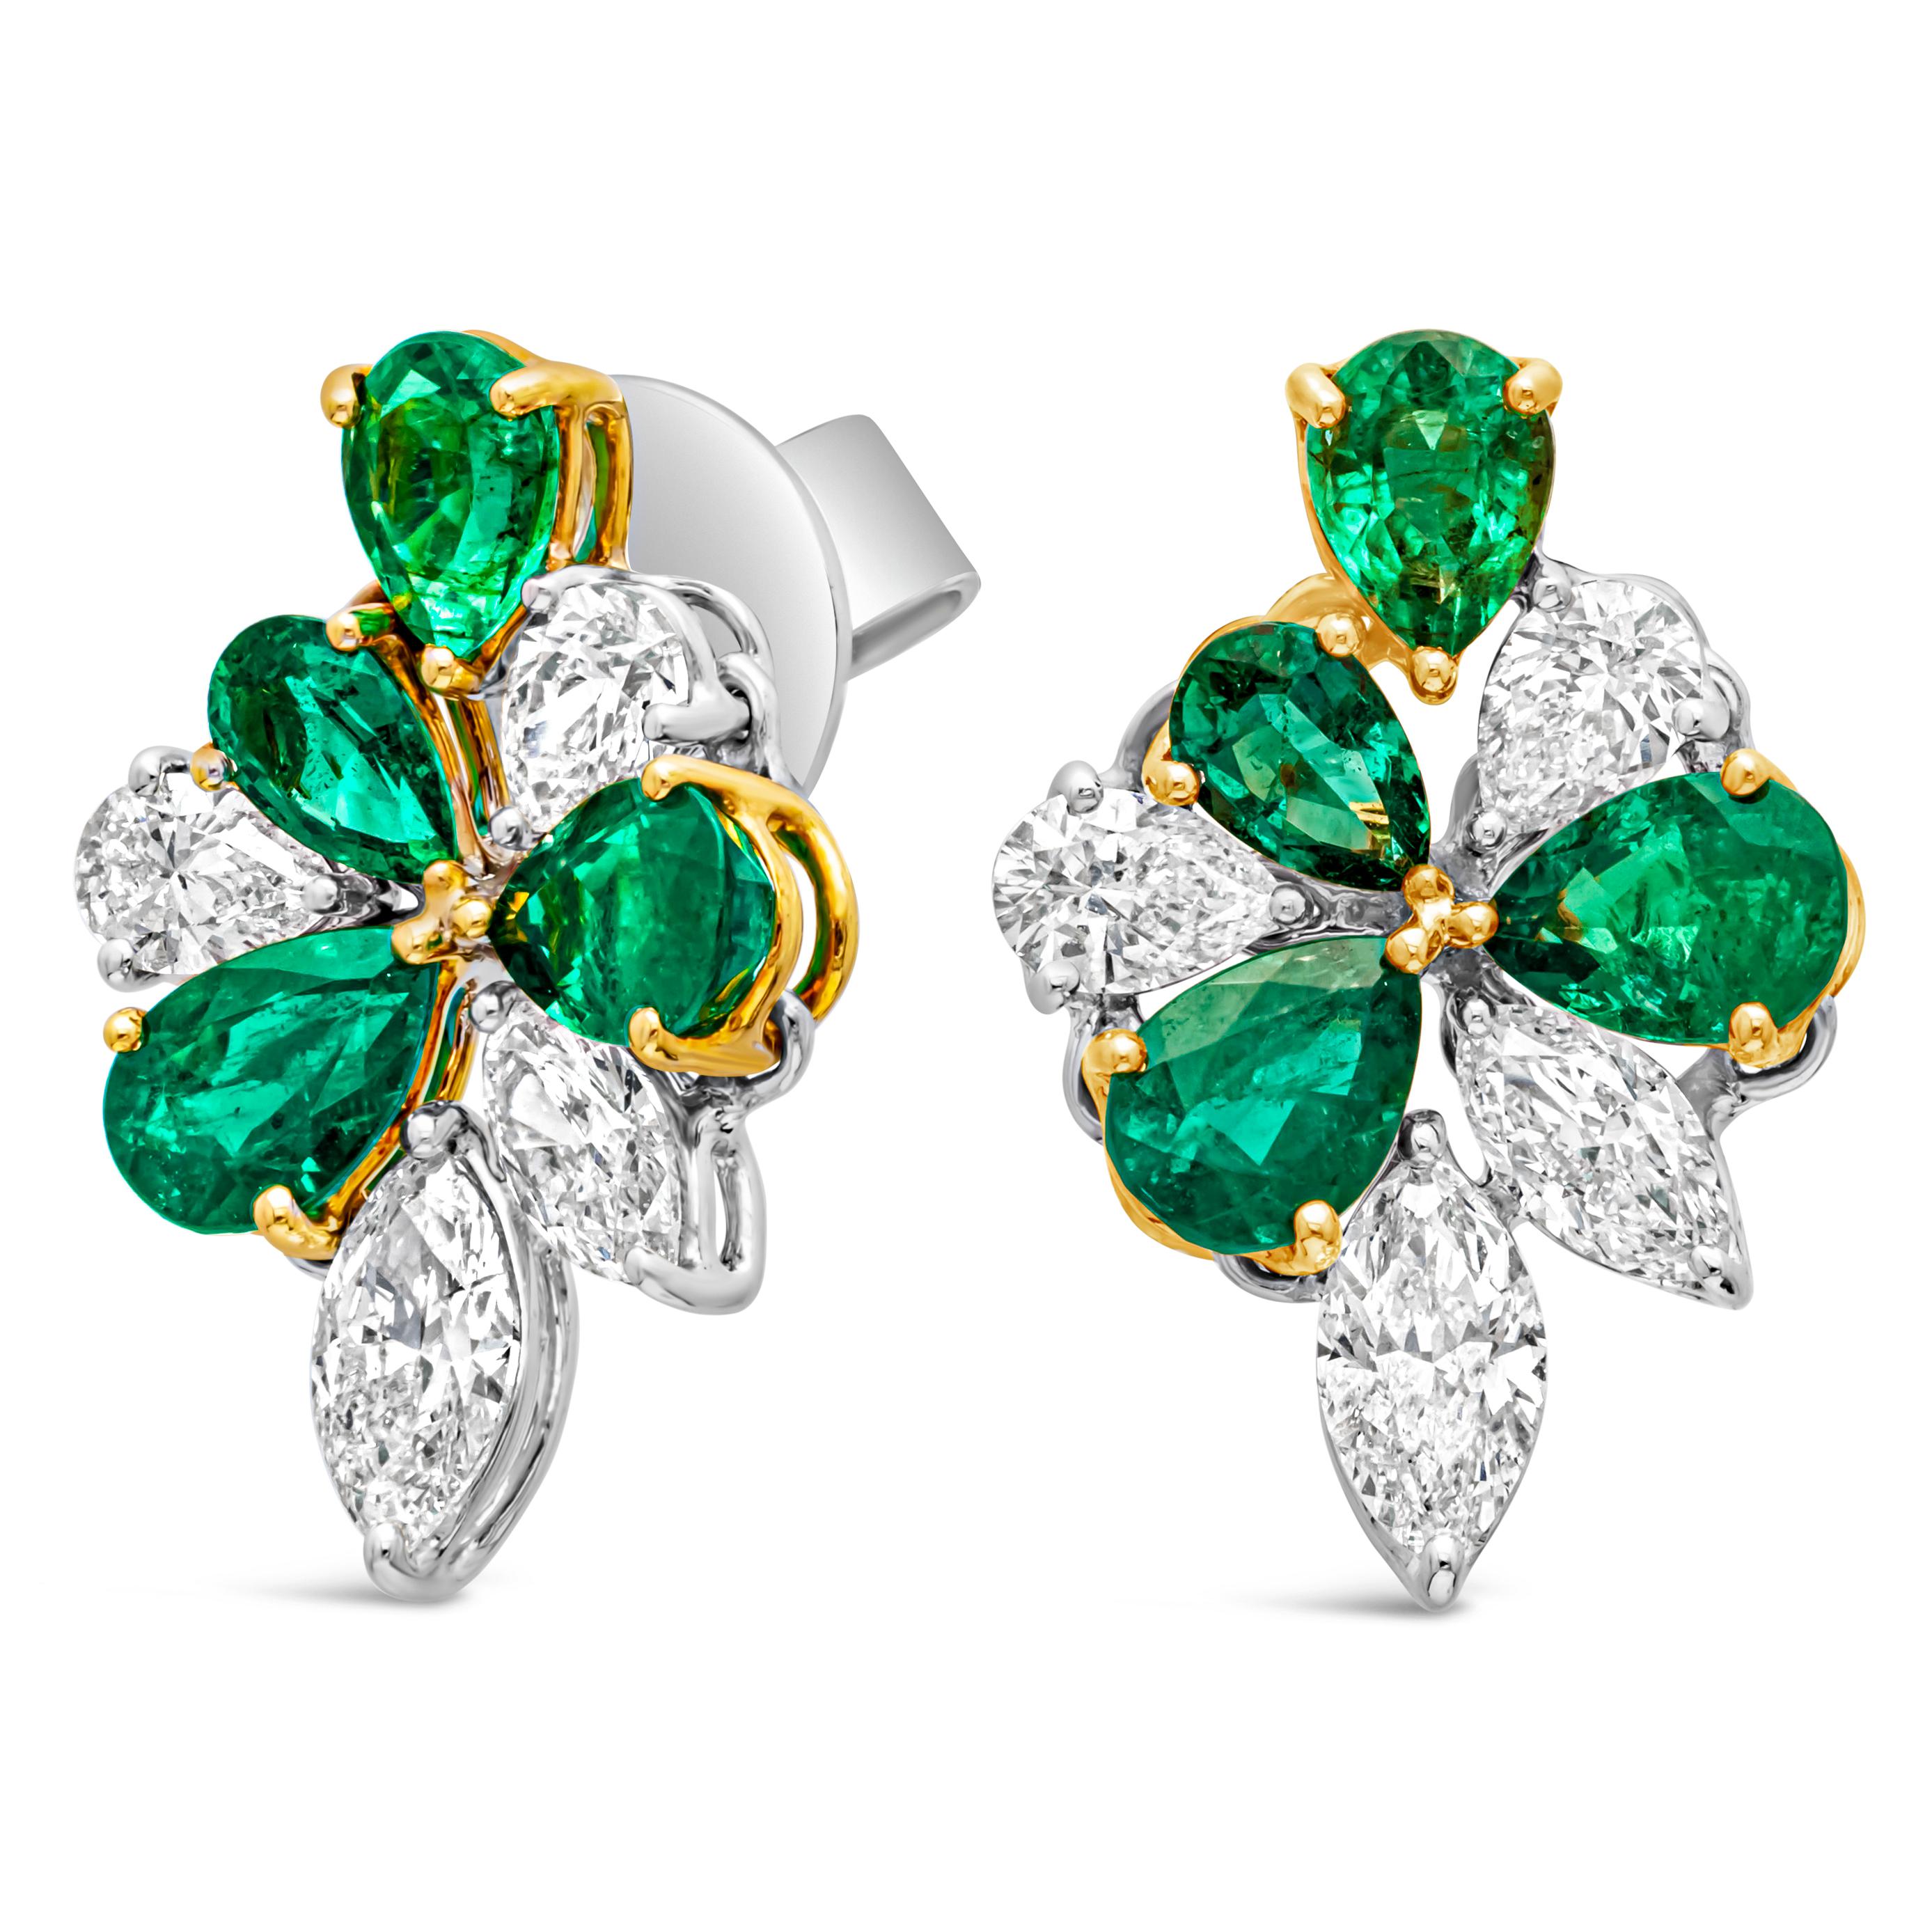 An exquisite and fashionable pair of stud earrings showcasing a cluster of pear shape and marquise cut color-rich green emeralds and diamonds weighing 4.16 carats total. Set in a beautiful floral-motif cluster design and prong setting. Perfectly